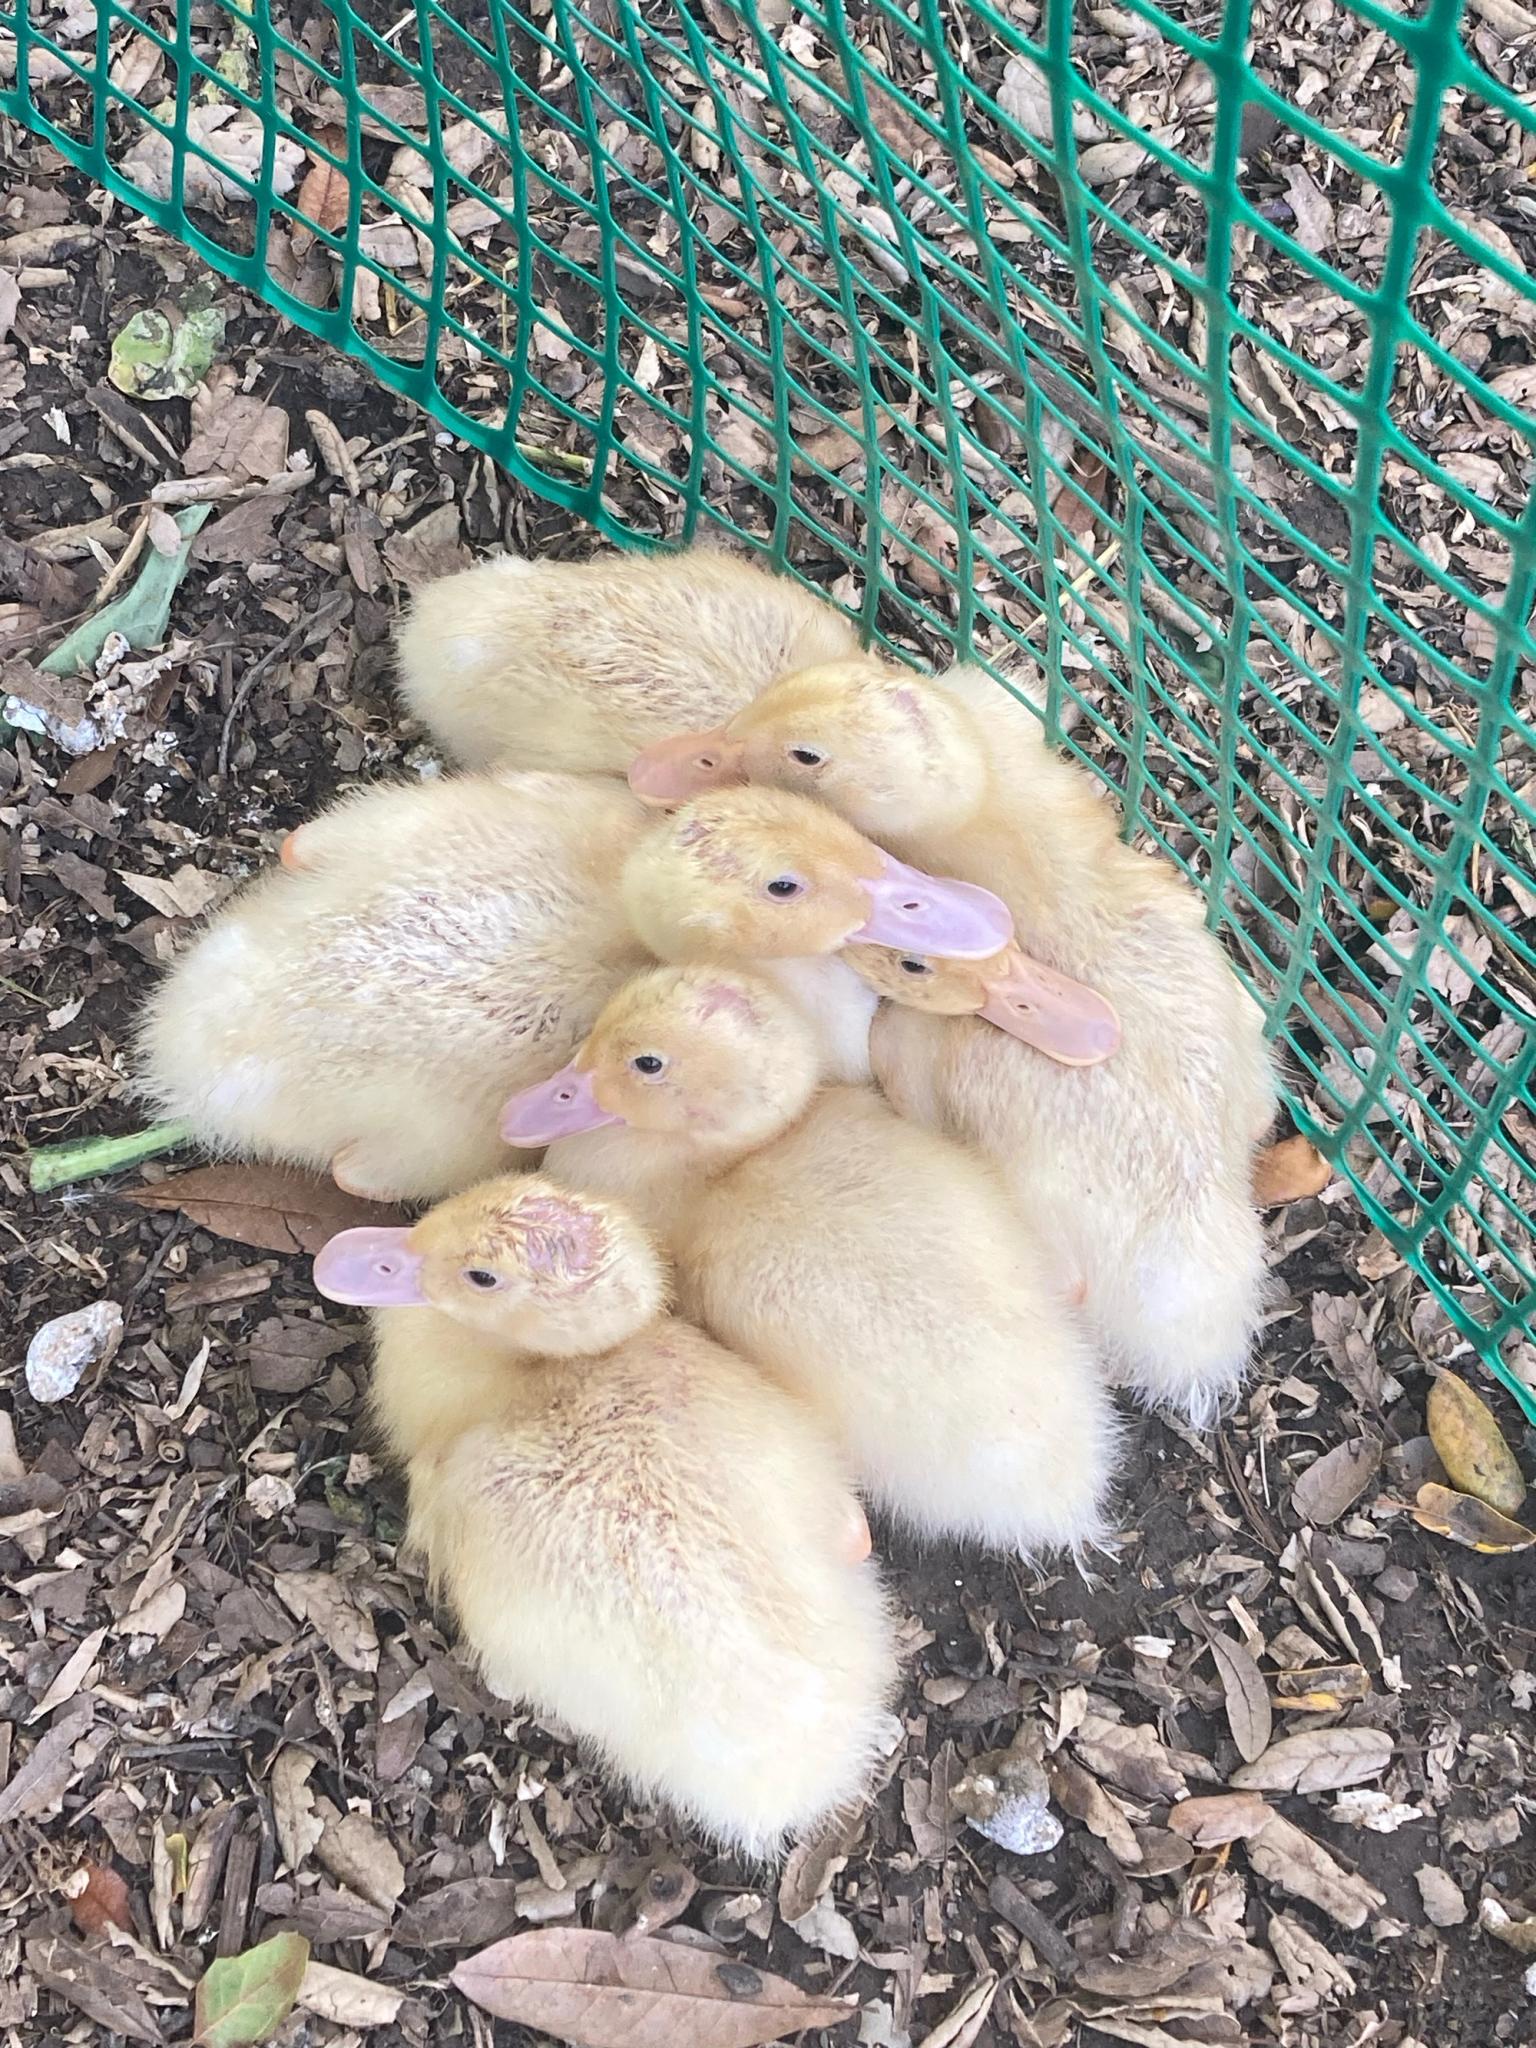 five baby ducklings cuddle together